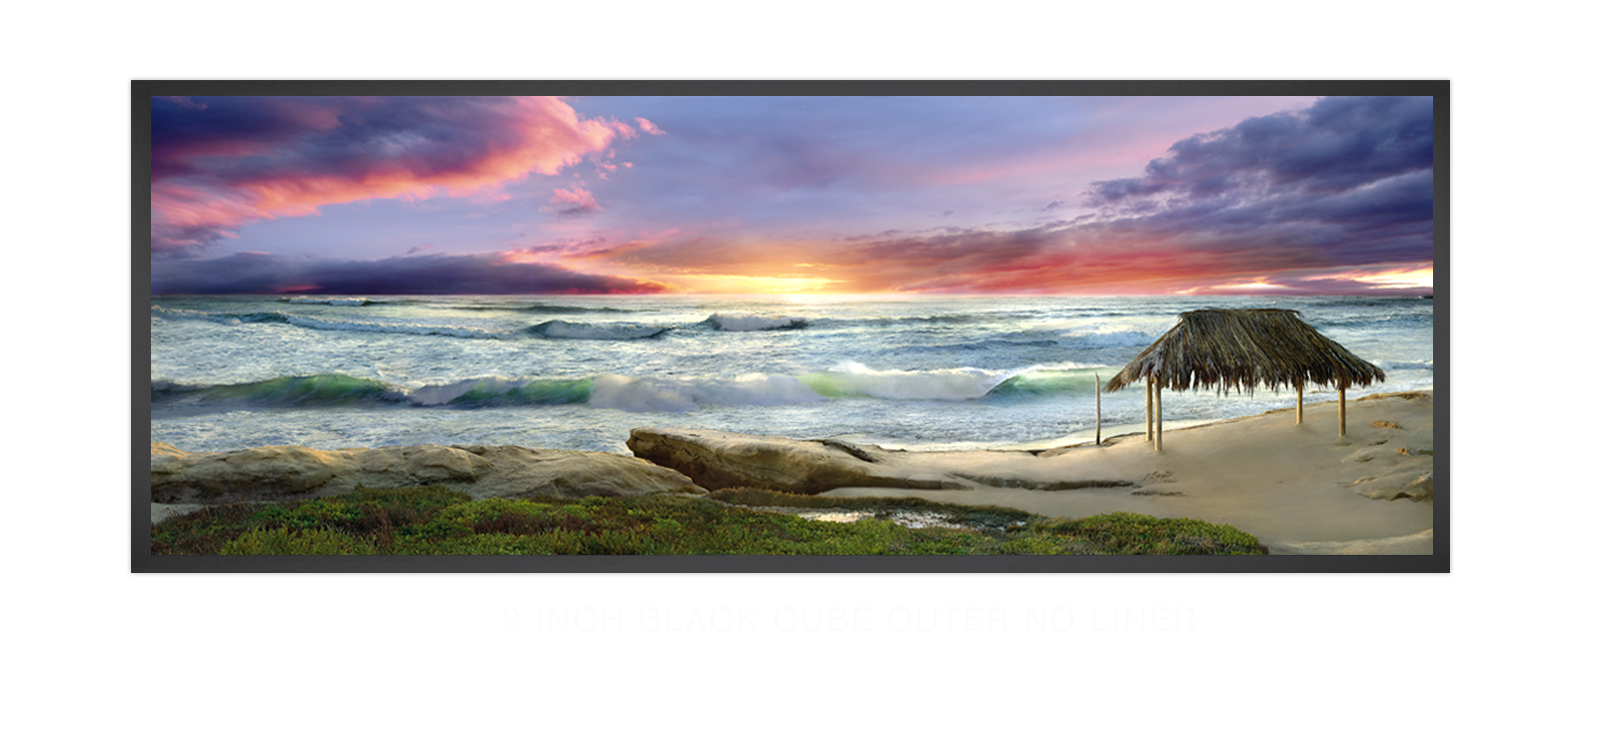 10AWAITANCE 2 Inch Black Cube Outer w_No Liner T